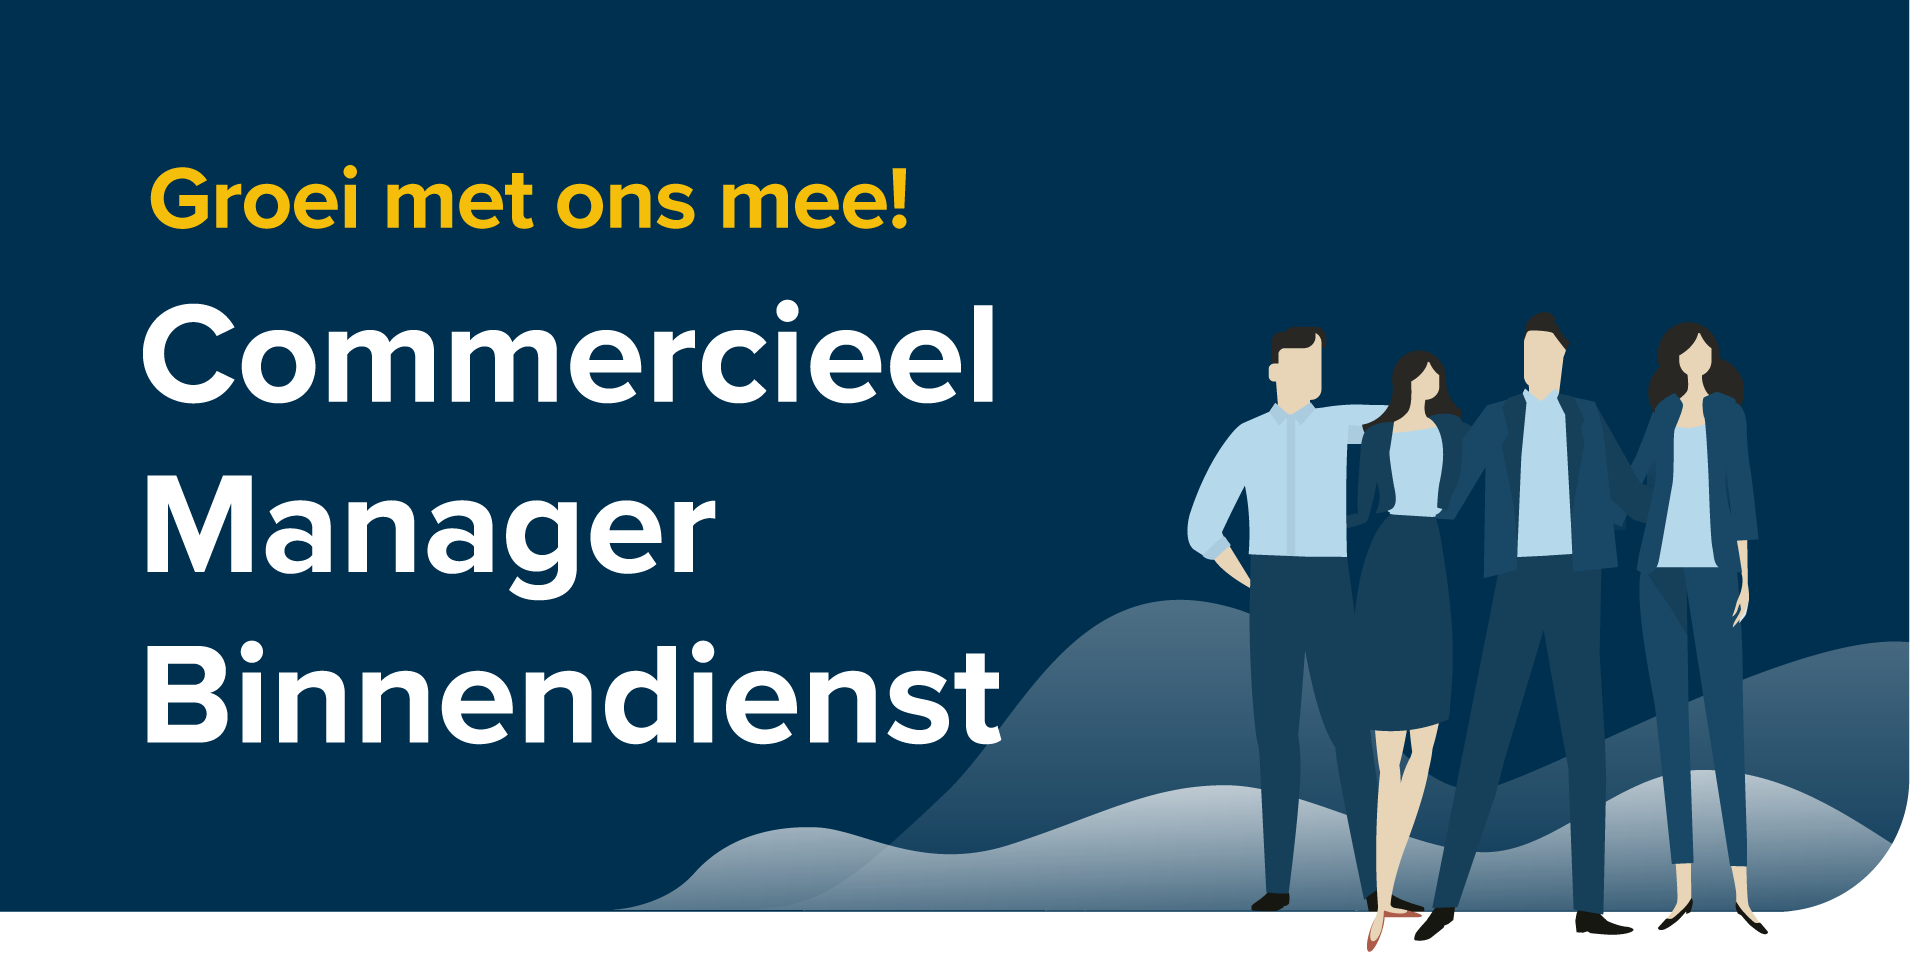 TG Commercieel Manager